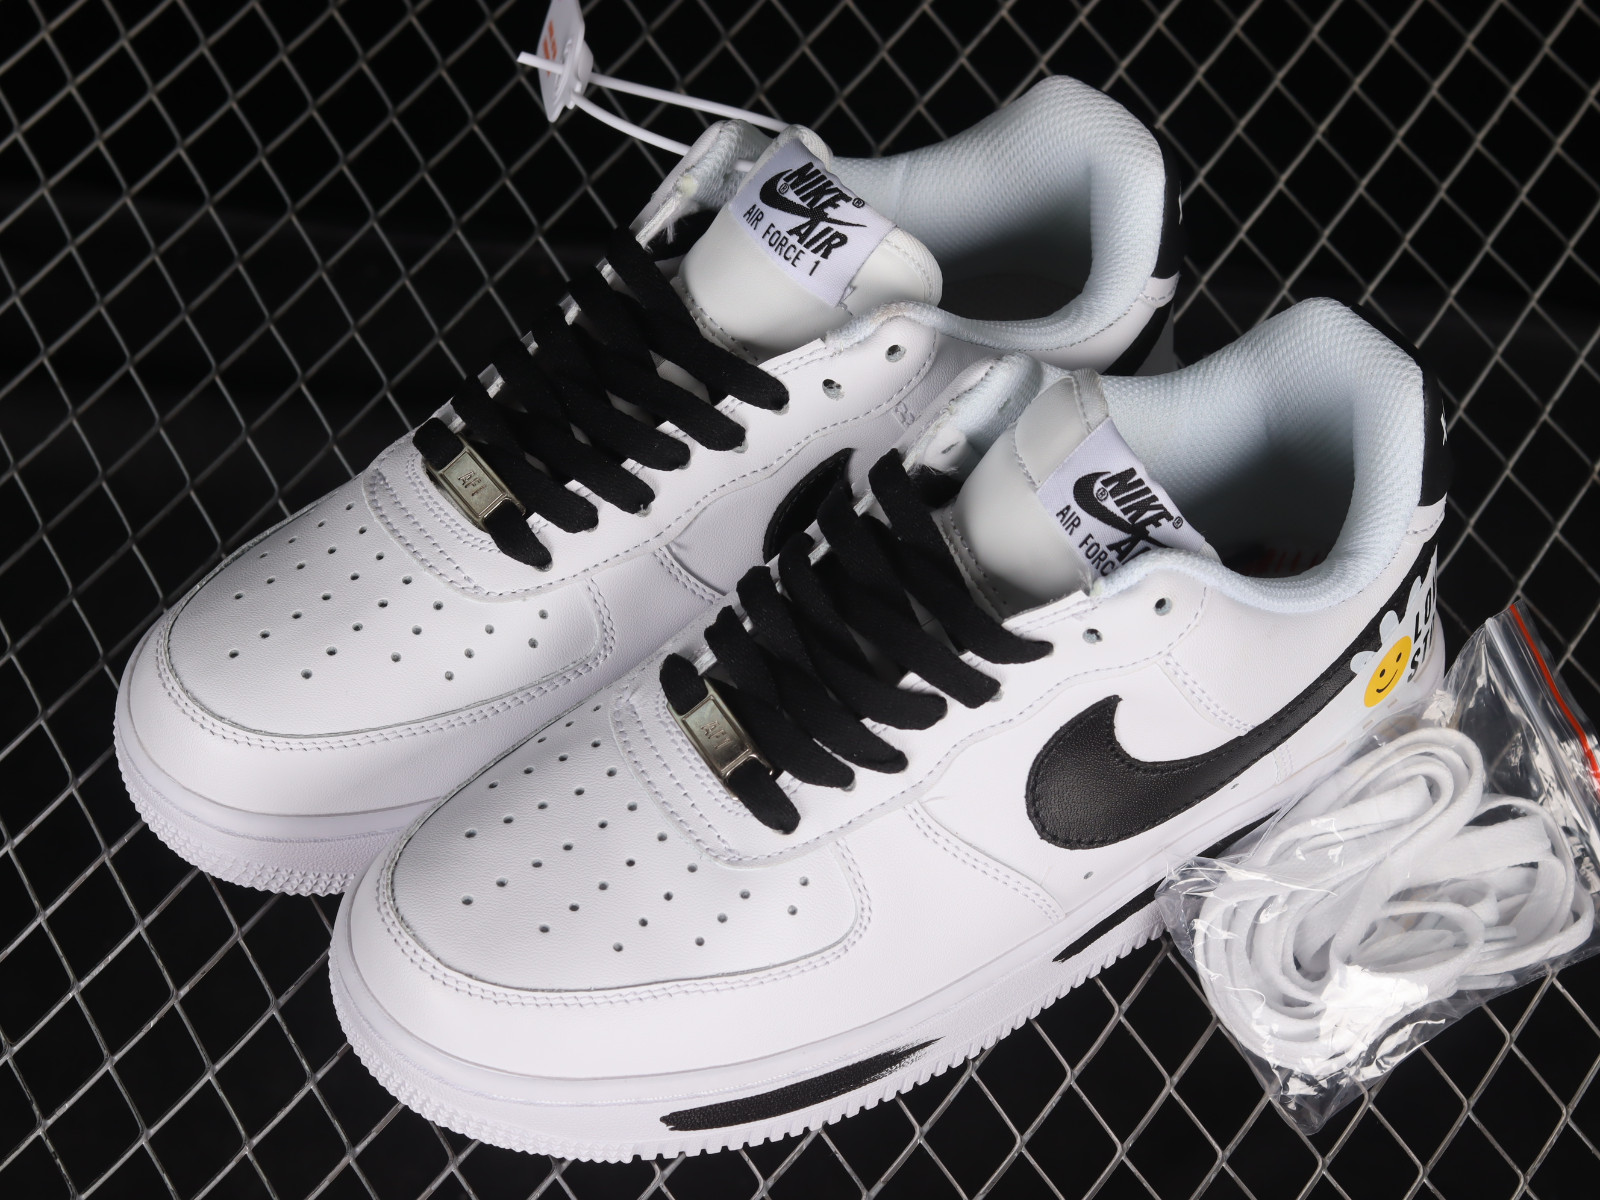 barrier Manufacturing When Nike Air Force 1 07 Low Sunflower White Black Yellow DO5220 - nike kyrie s2  hybrid release date info - 176 - StclaircomoShops